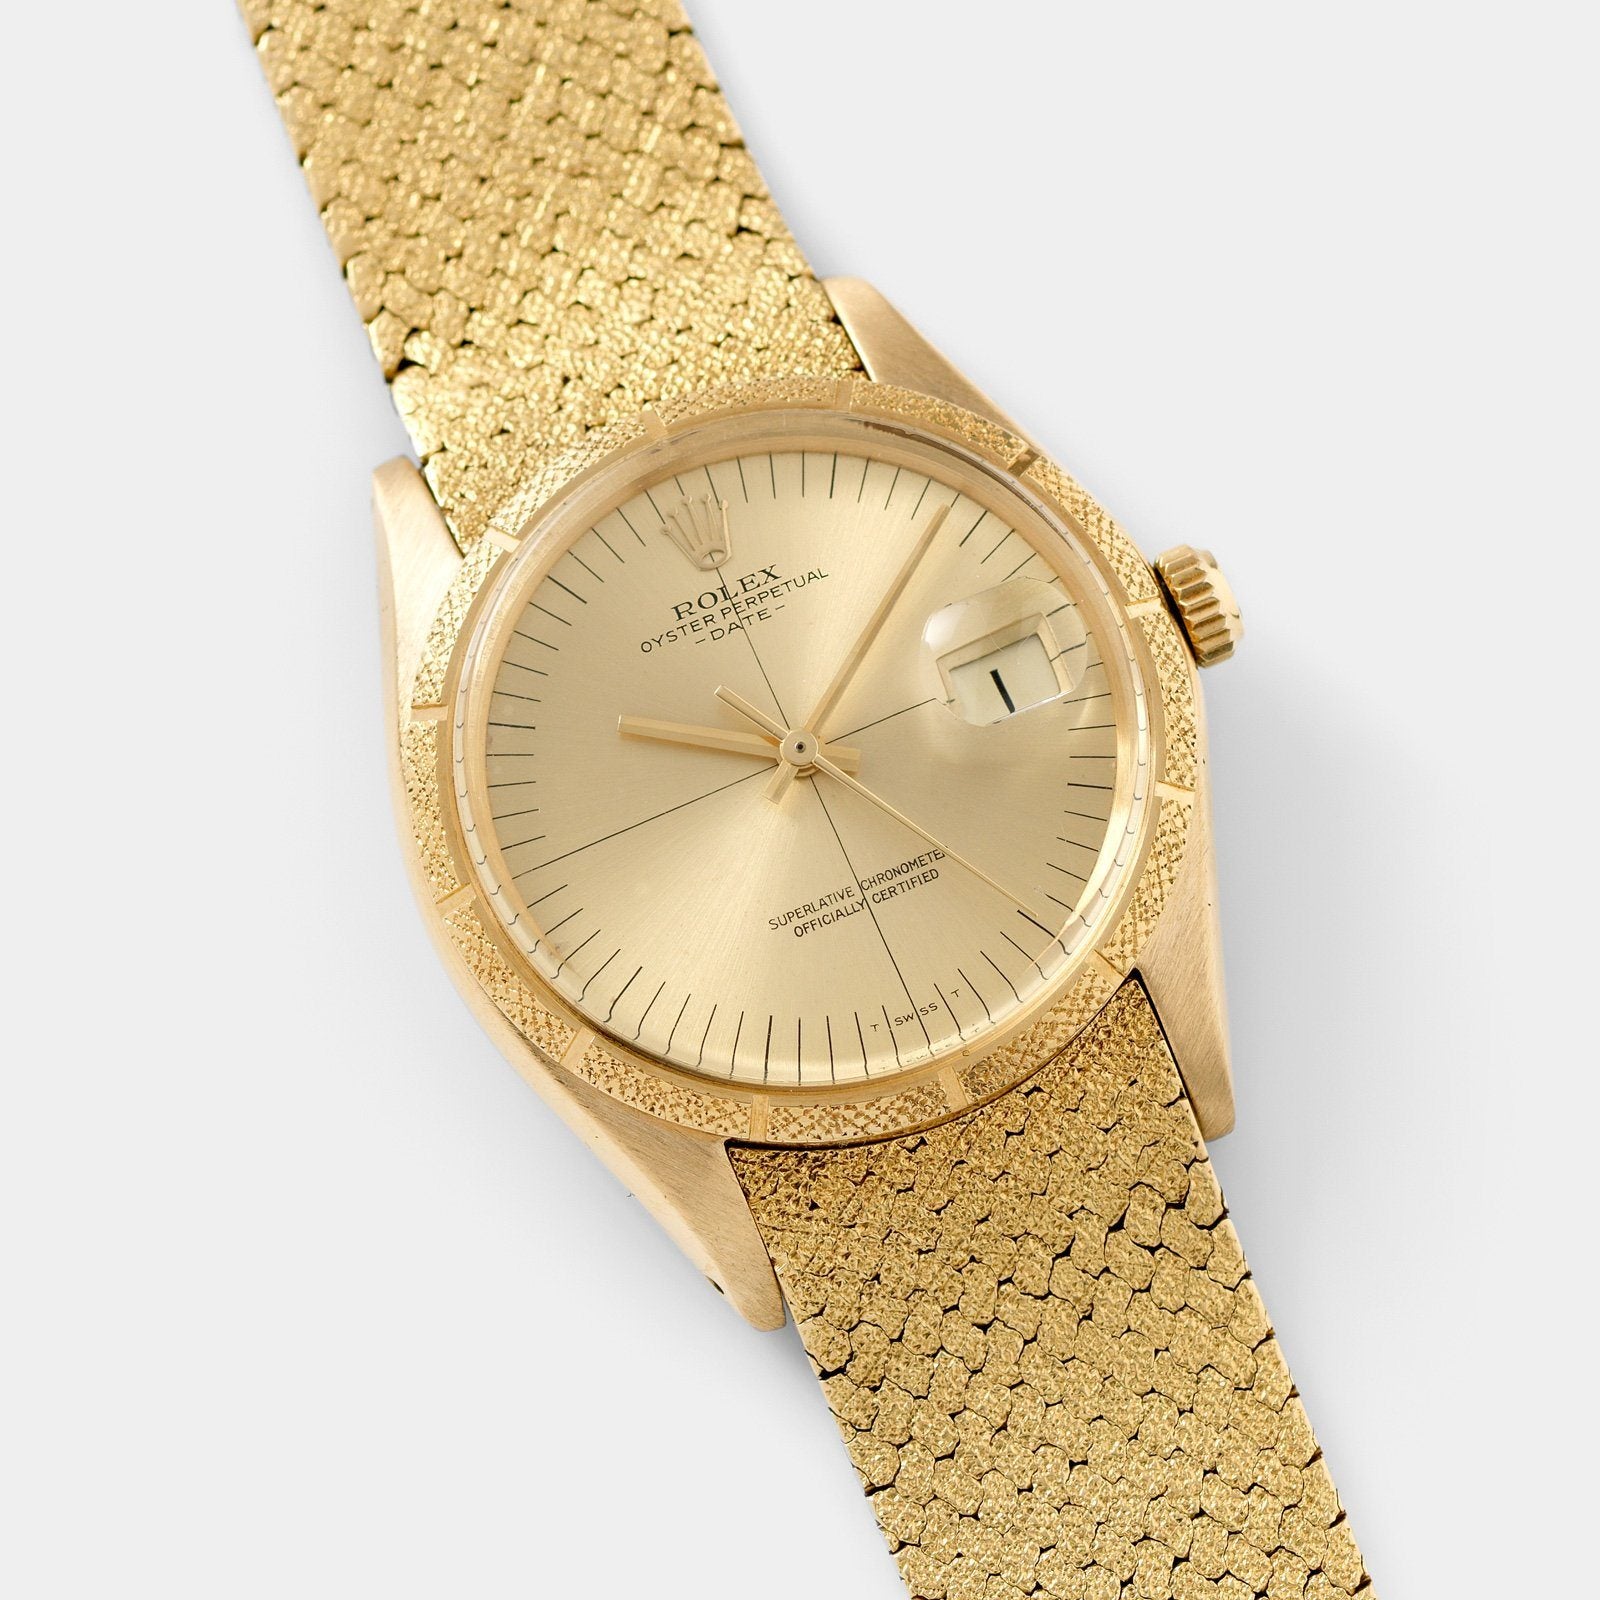 18k gold rolex oyster perpetual datejust price